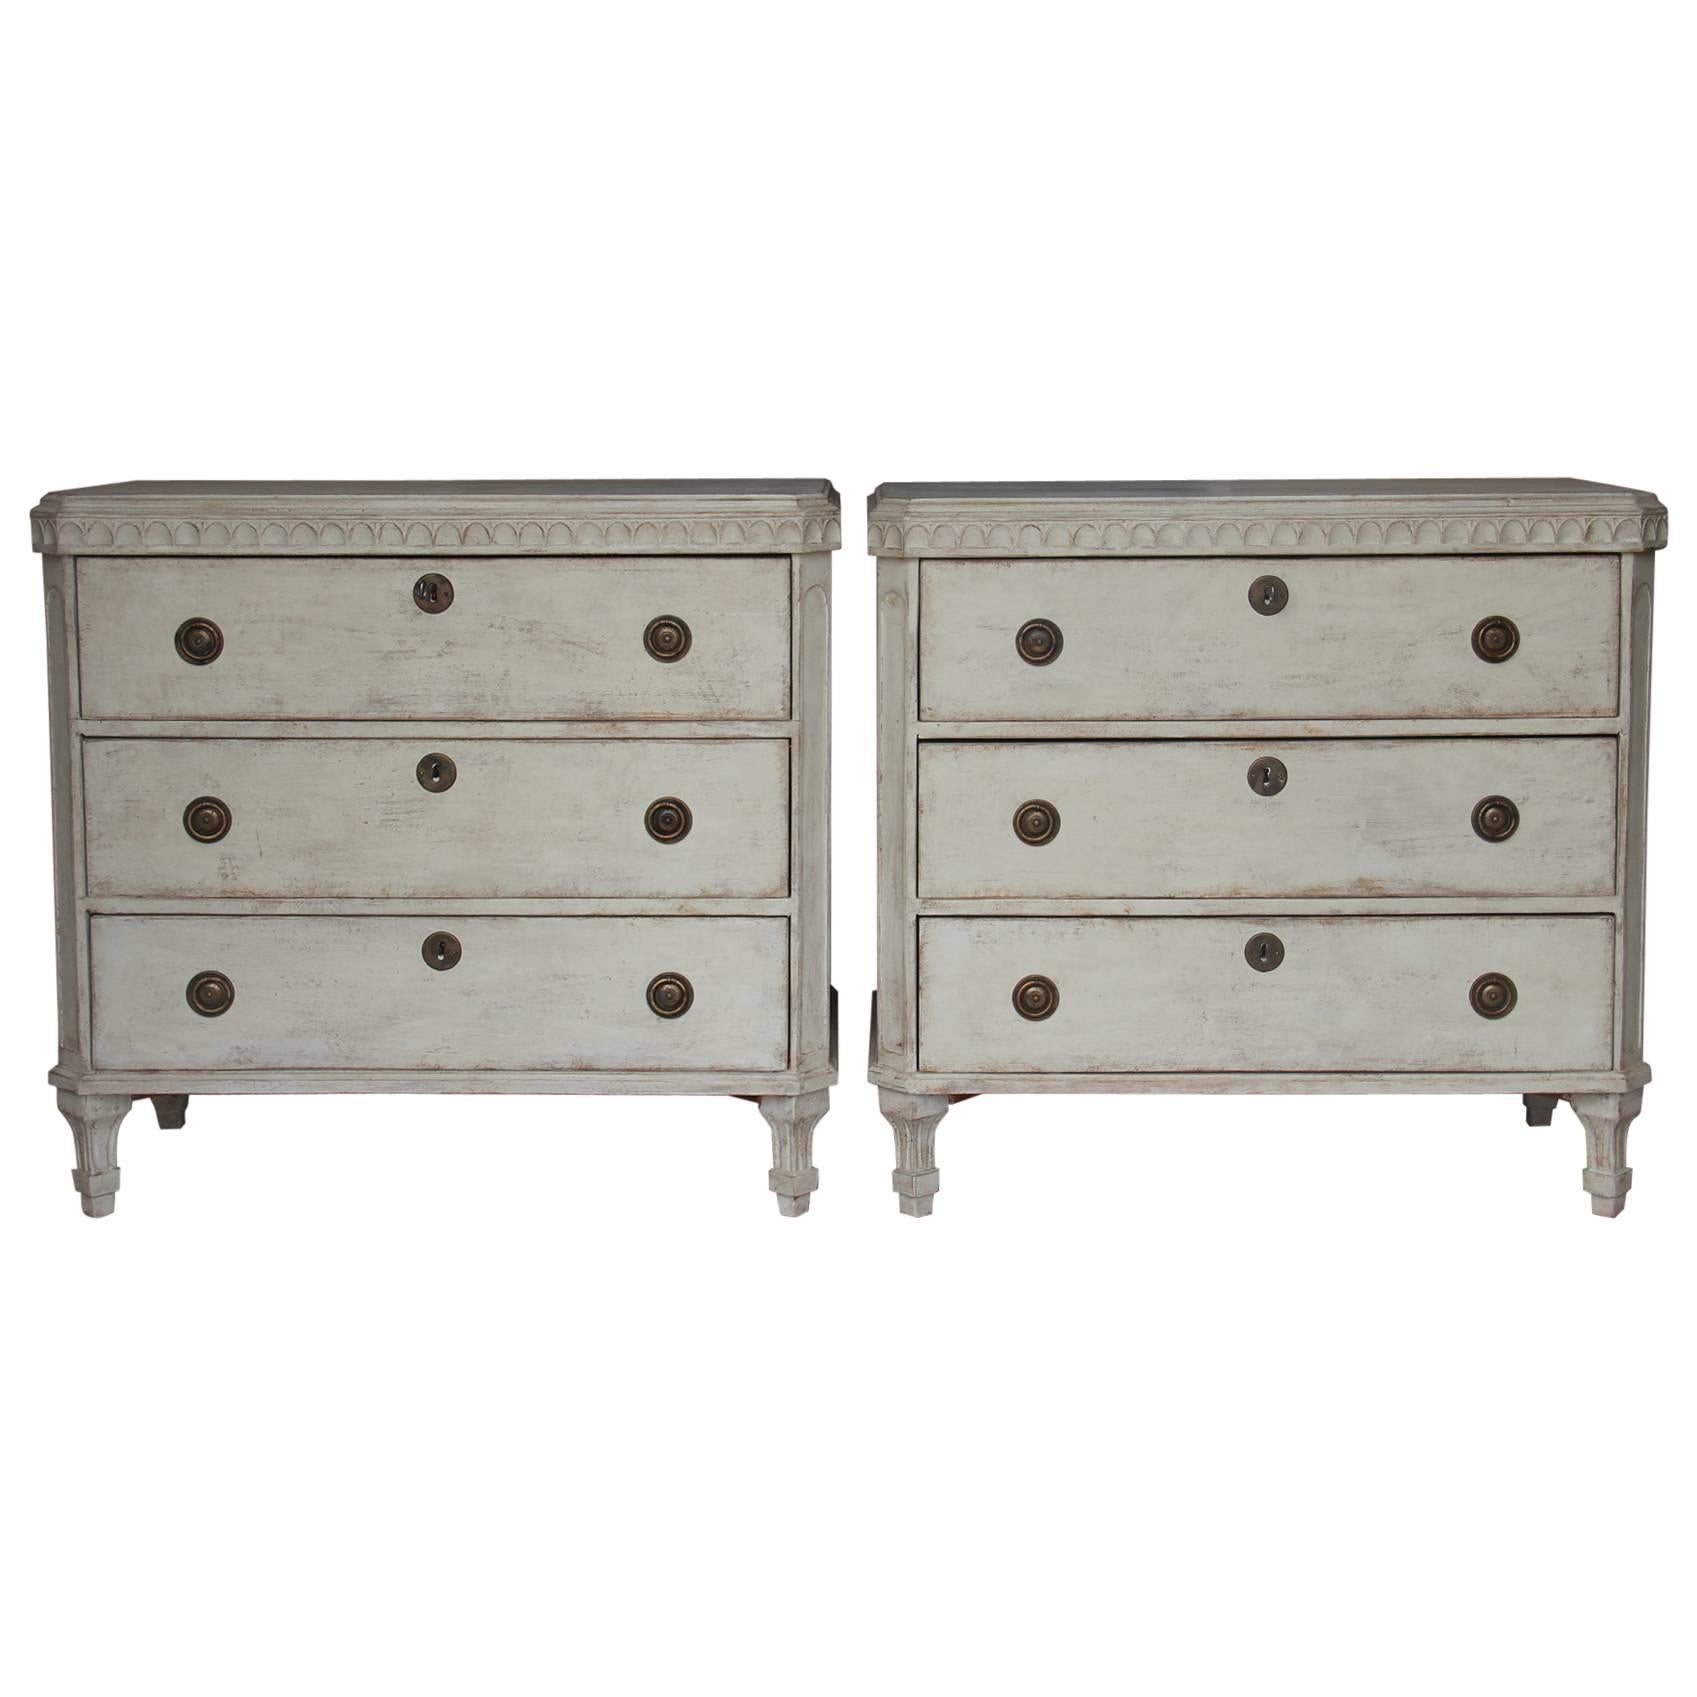 Swedish Gustavian Style Pair of Painted Bedside Chests